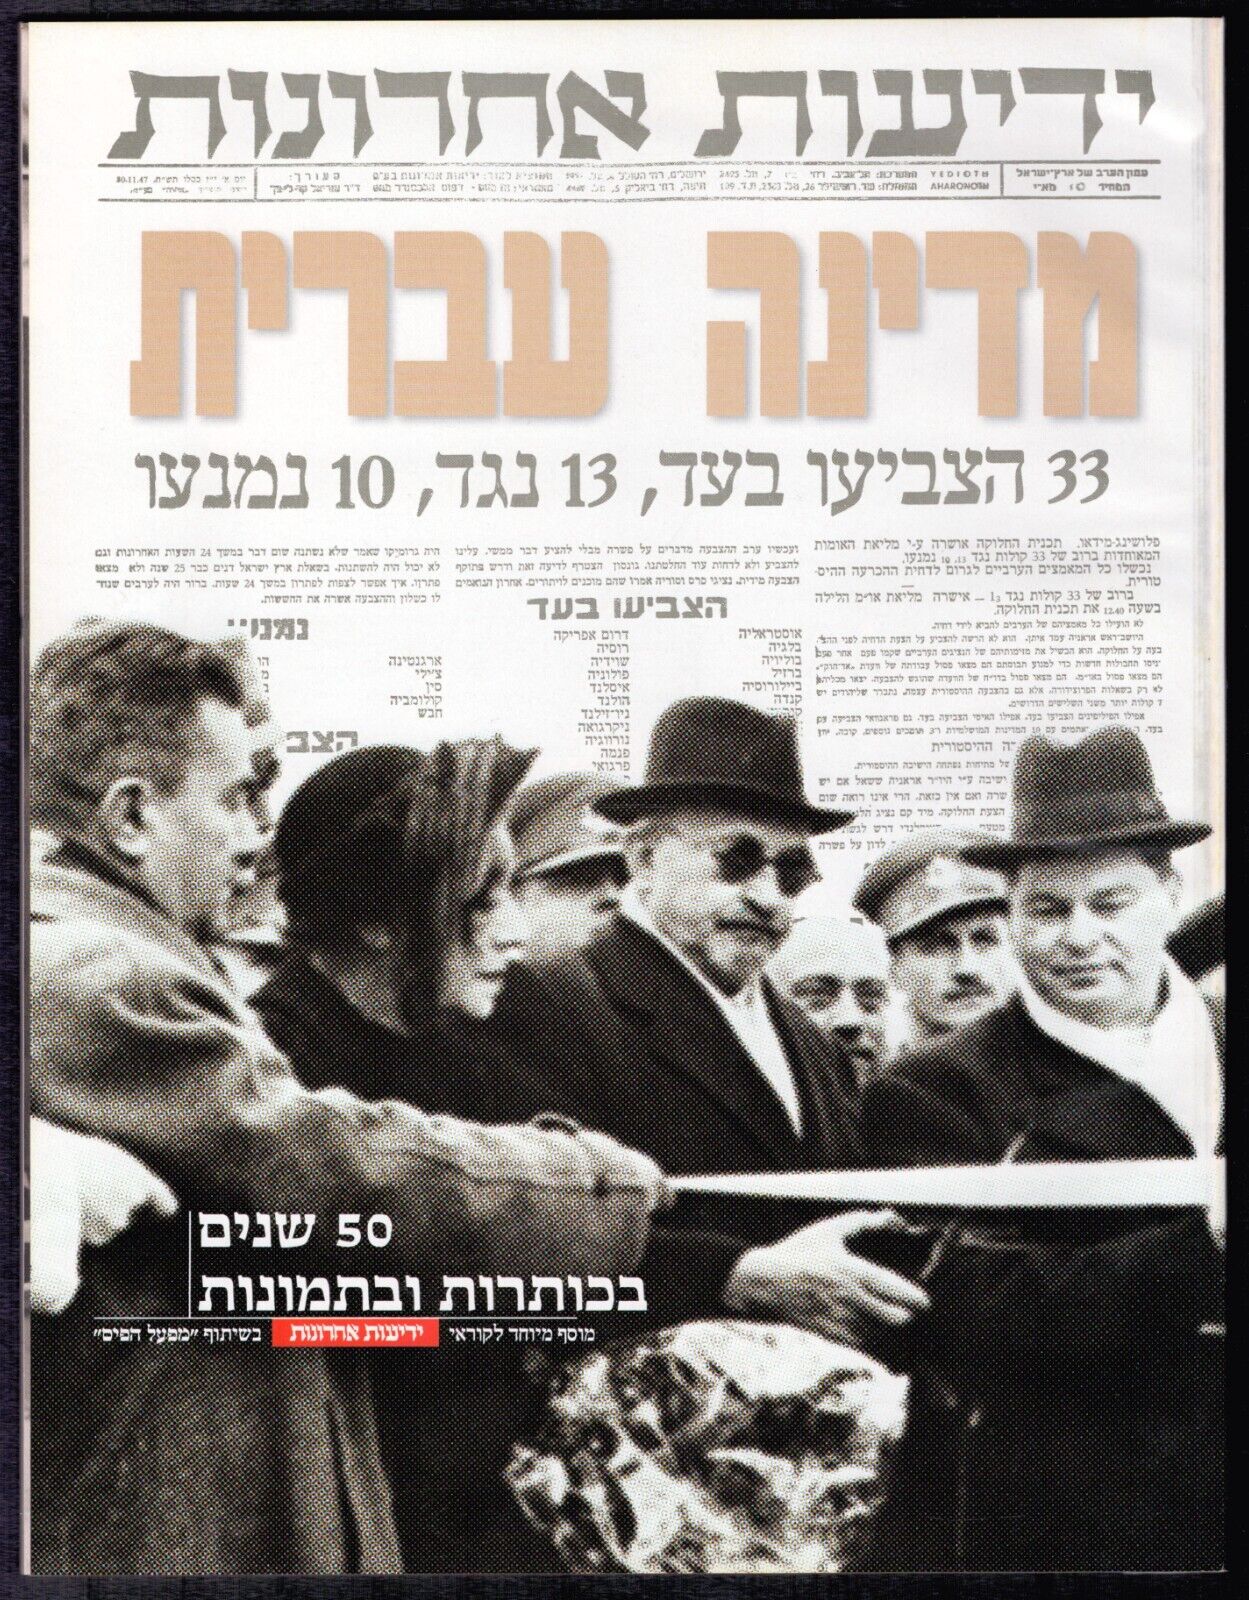 50 years of Israel, headlines and photos Yedioth Ahronoth special issue 1998